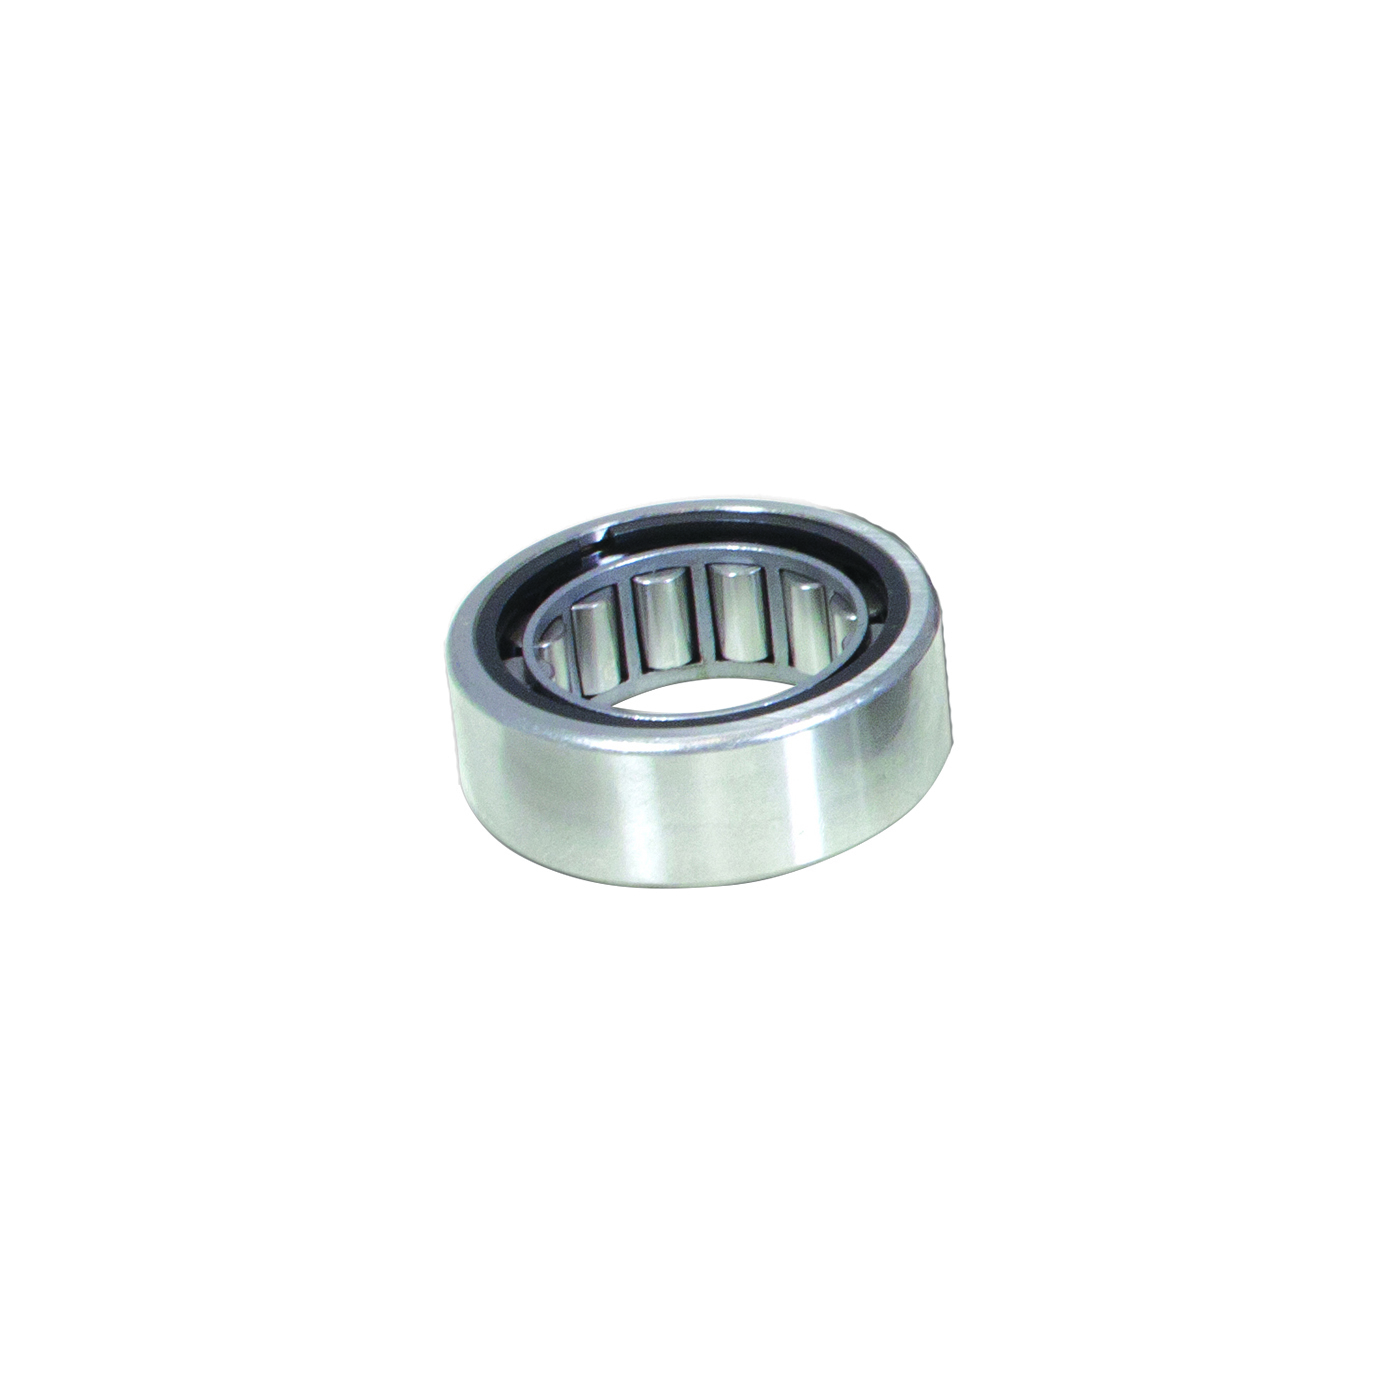 Conversion bearing for small bearing Ford 9" axle in large bearing housing. 